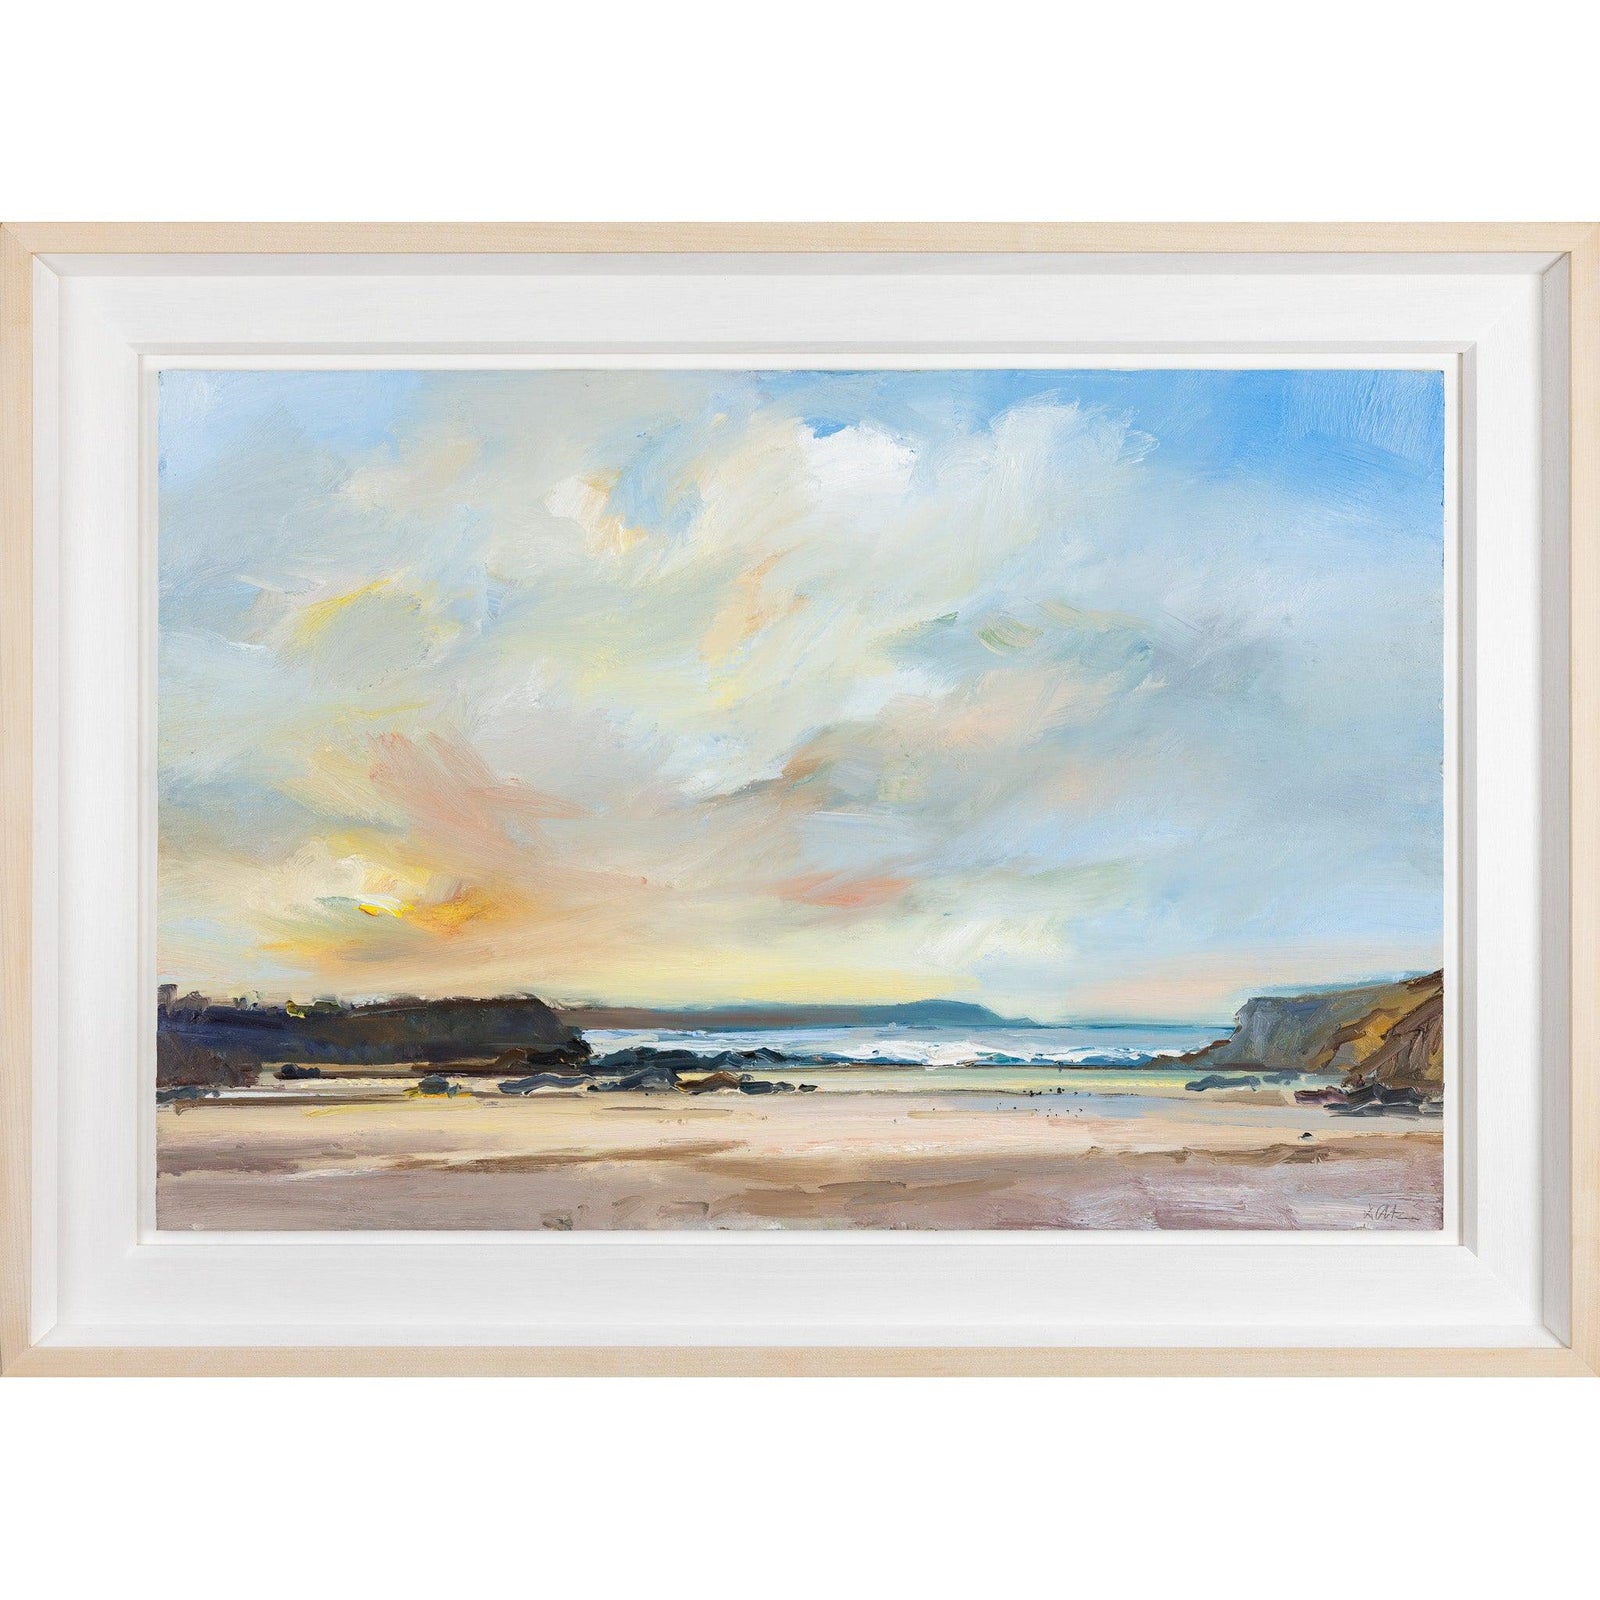 'Sunset, Trevone Beach' oil on board original by David Atkins, available at Padstow Gallery, Cornwall